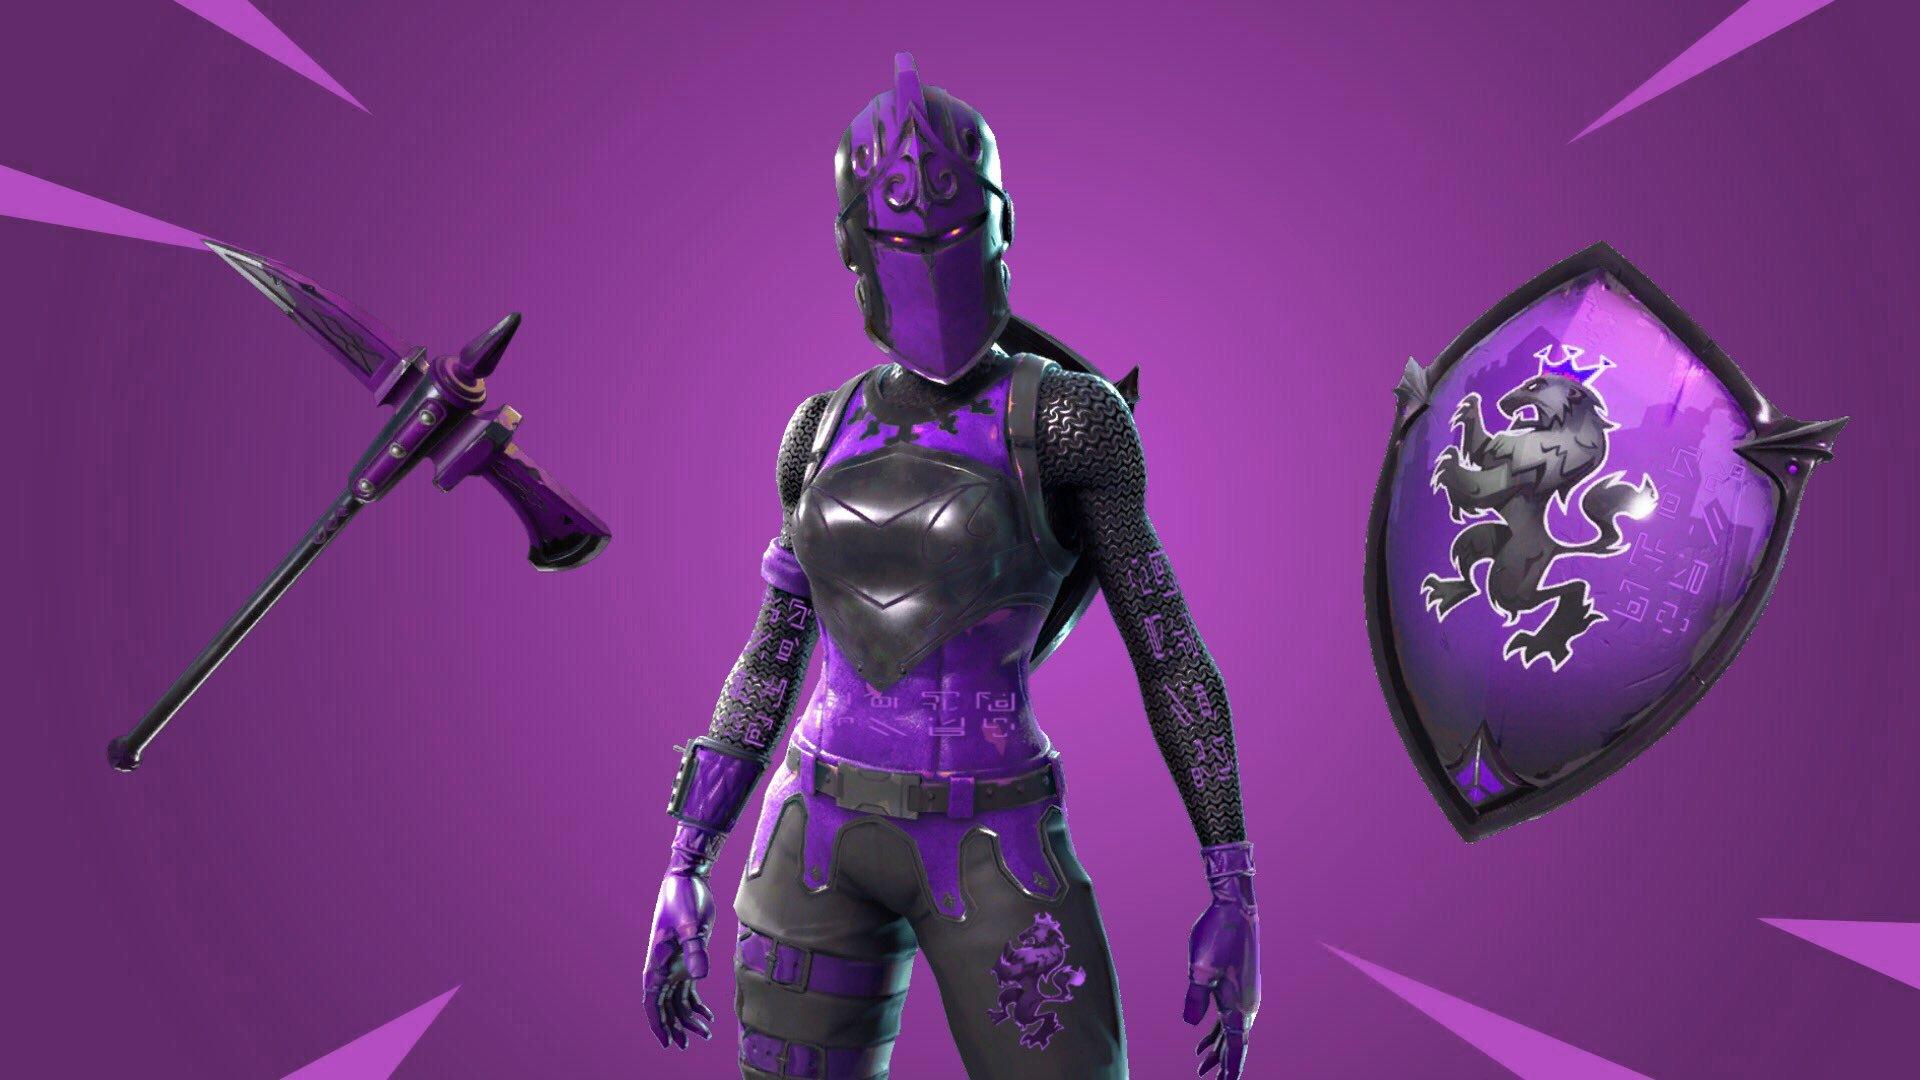 Download wallpapers Exalted Black Eternal Knight 4k red neon lights  Fortnite Battle Royale Fortnite characters Exalted Black Eternal Knight  Skin Fortnite Exalted Black Eternal Knight Fortnite for desktop with  resolution 3840x2400 High